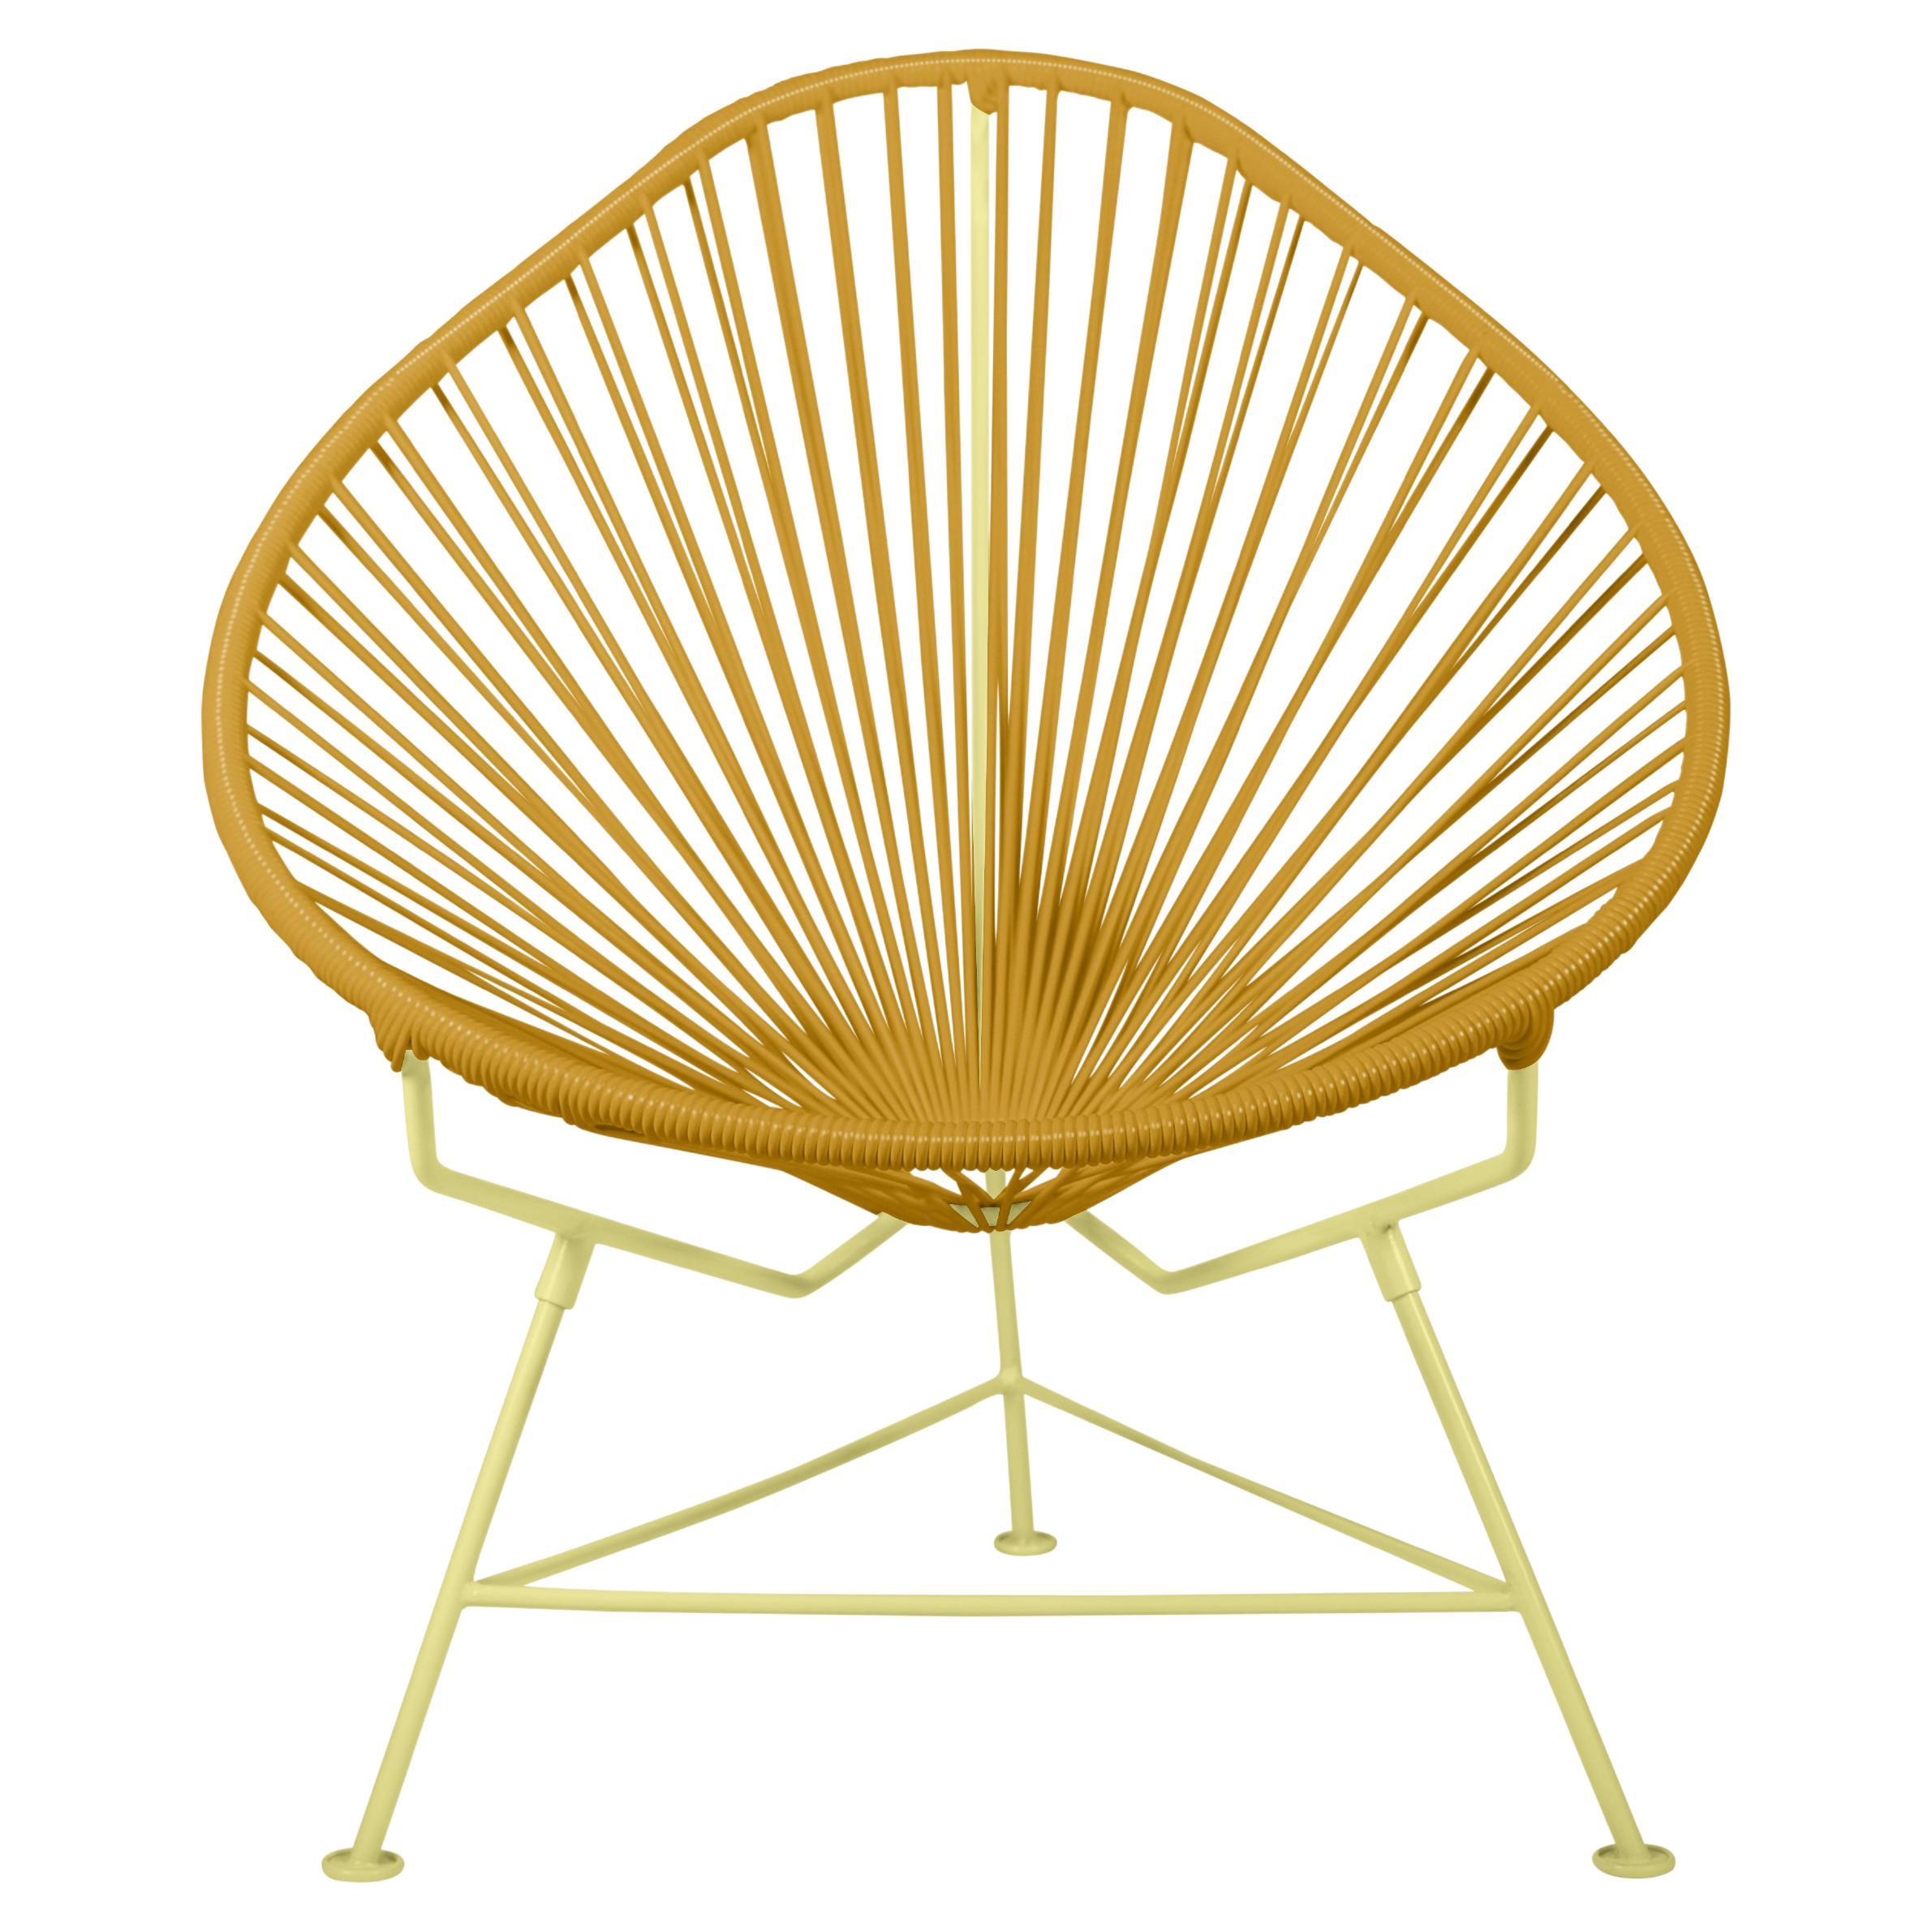 Innit Designs Acapulco Chair Caramel Weave on Yellow Frame